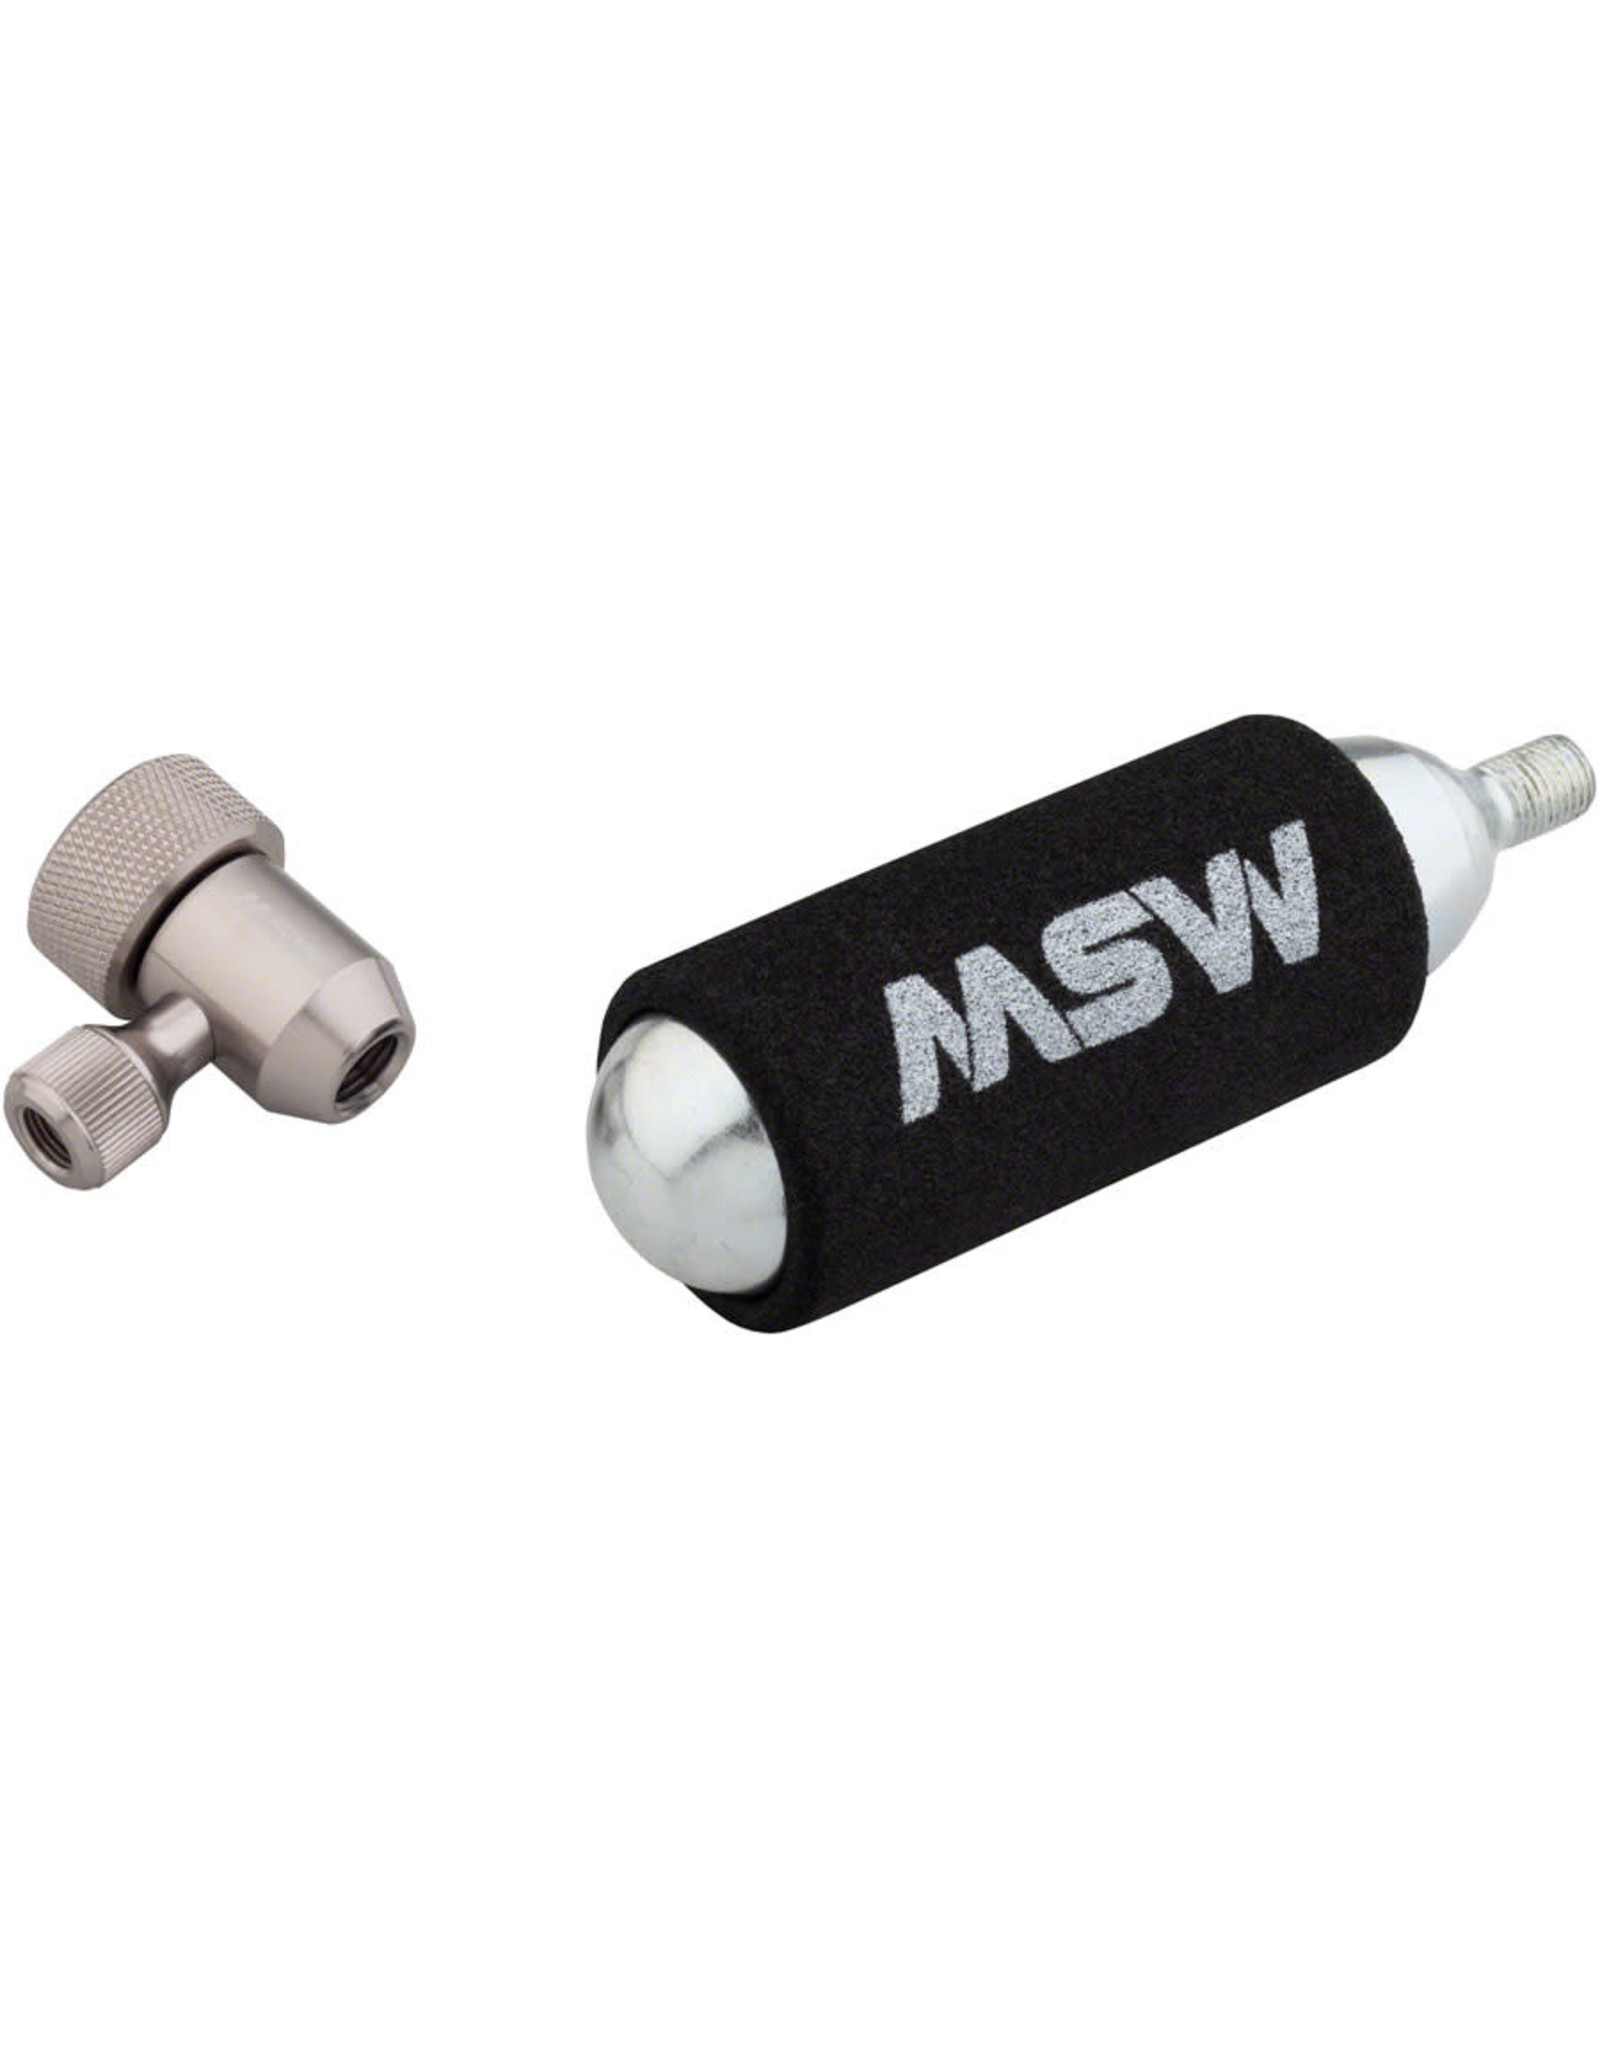 MSW MSW Jetstream Kit with Jetstream Adjustable Inflation Head, one 38g CO2 cartridge, and Protective Sleeve